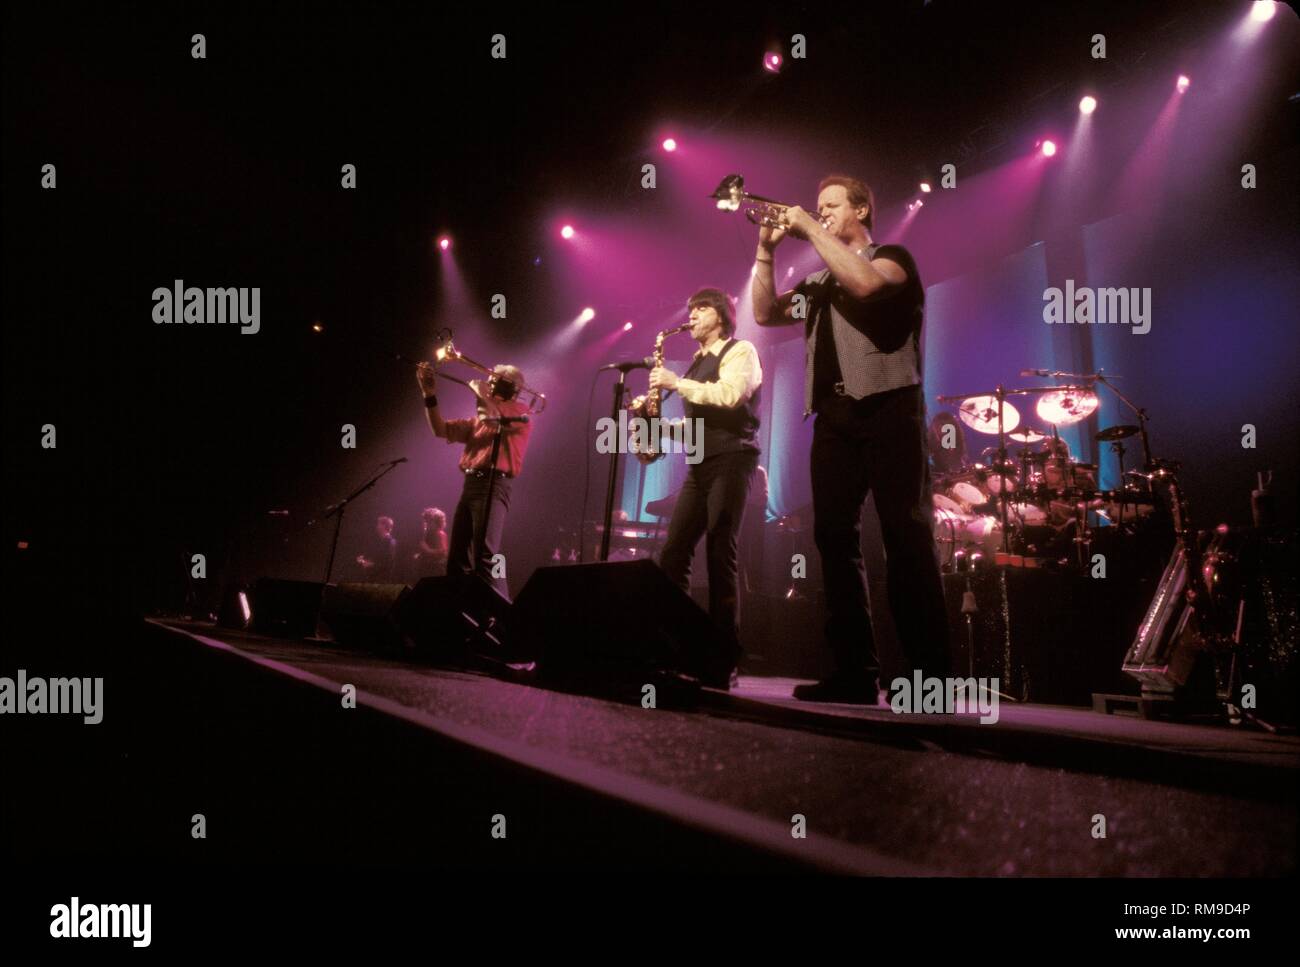 Chicago band members are shown performing on stage during a 'live' concert performance. Stock Photo